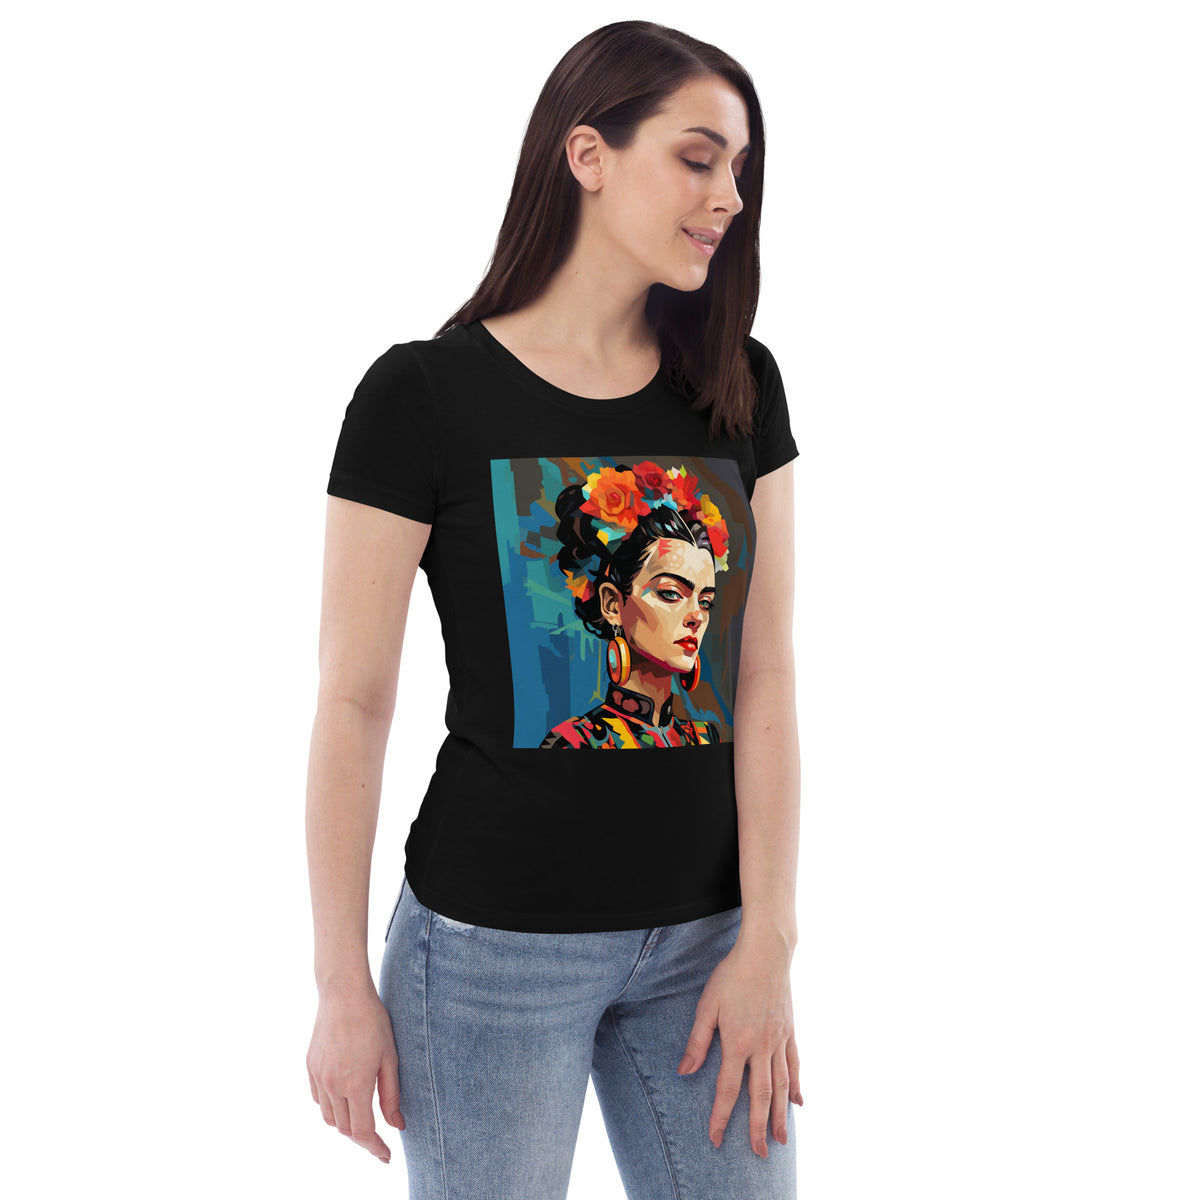 Woman with Floral Headpiece | Women's T-shirt